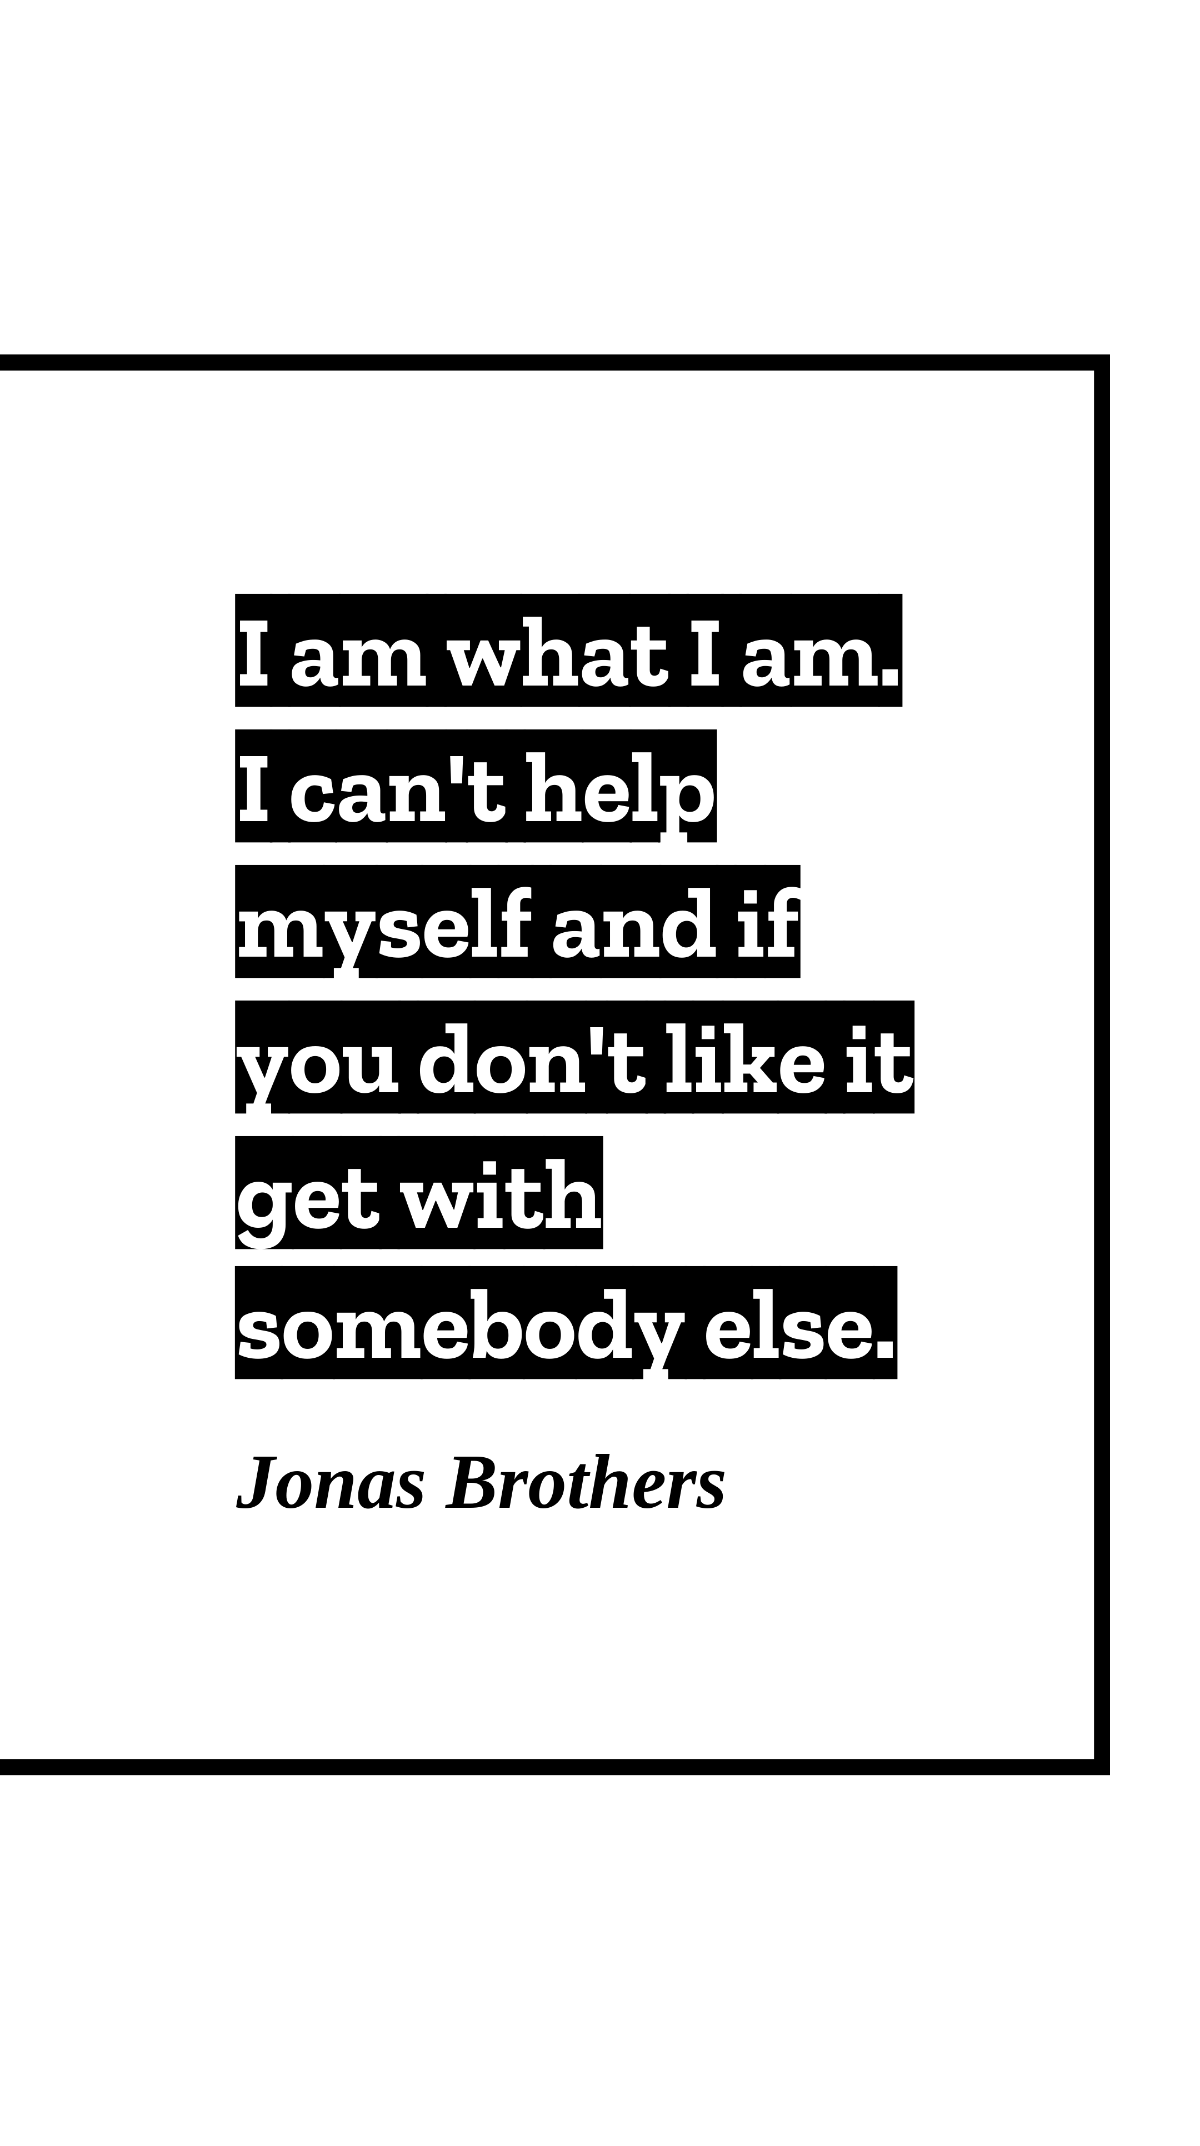 Jonas Brothers - I am what I am. I can't help myself and if you don't like it get with somebody else. Template